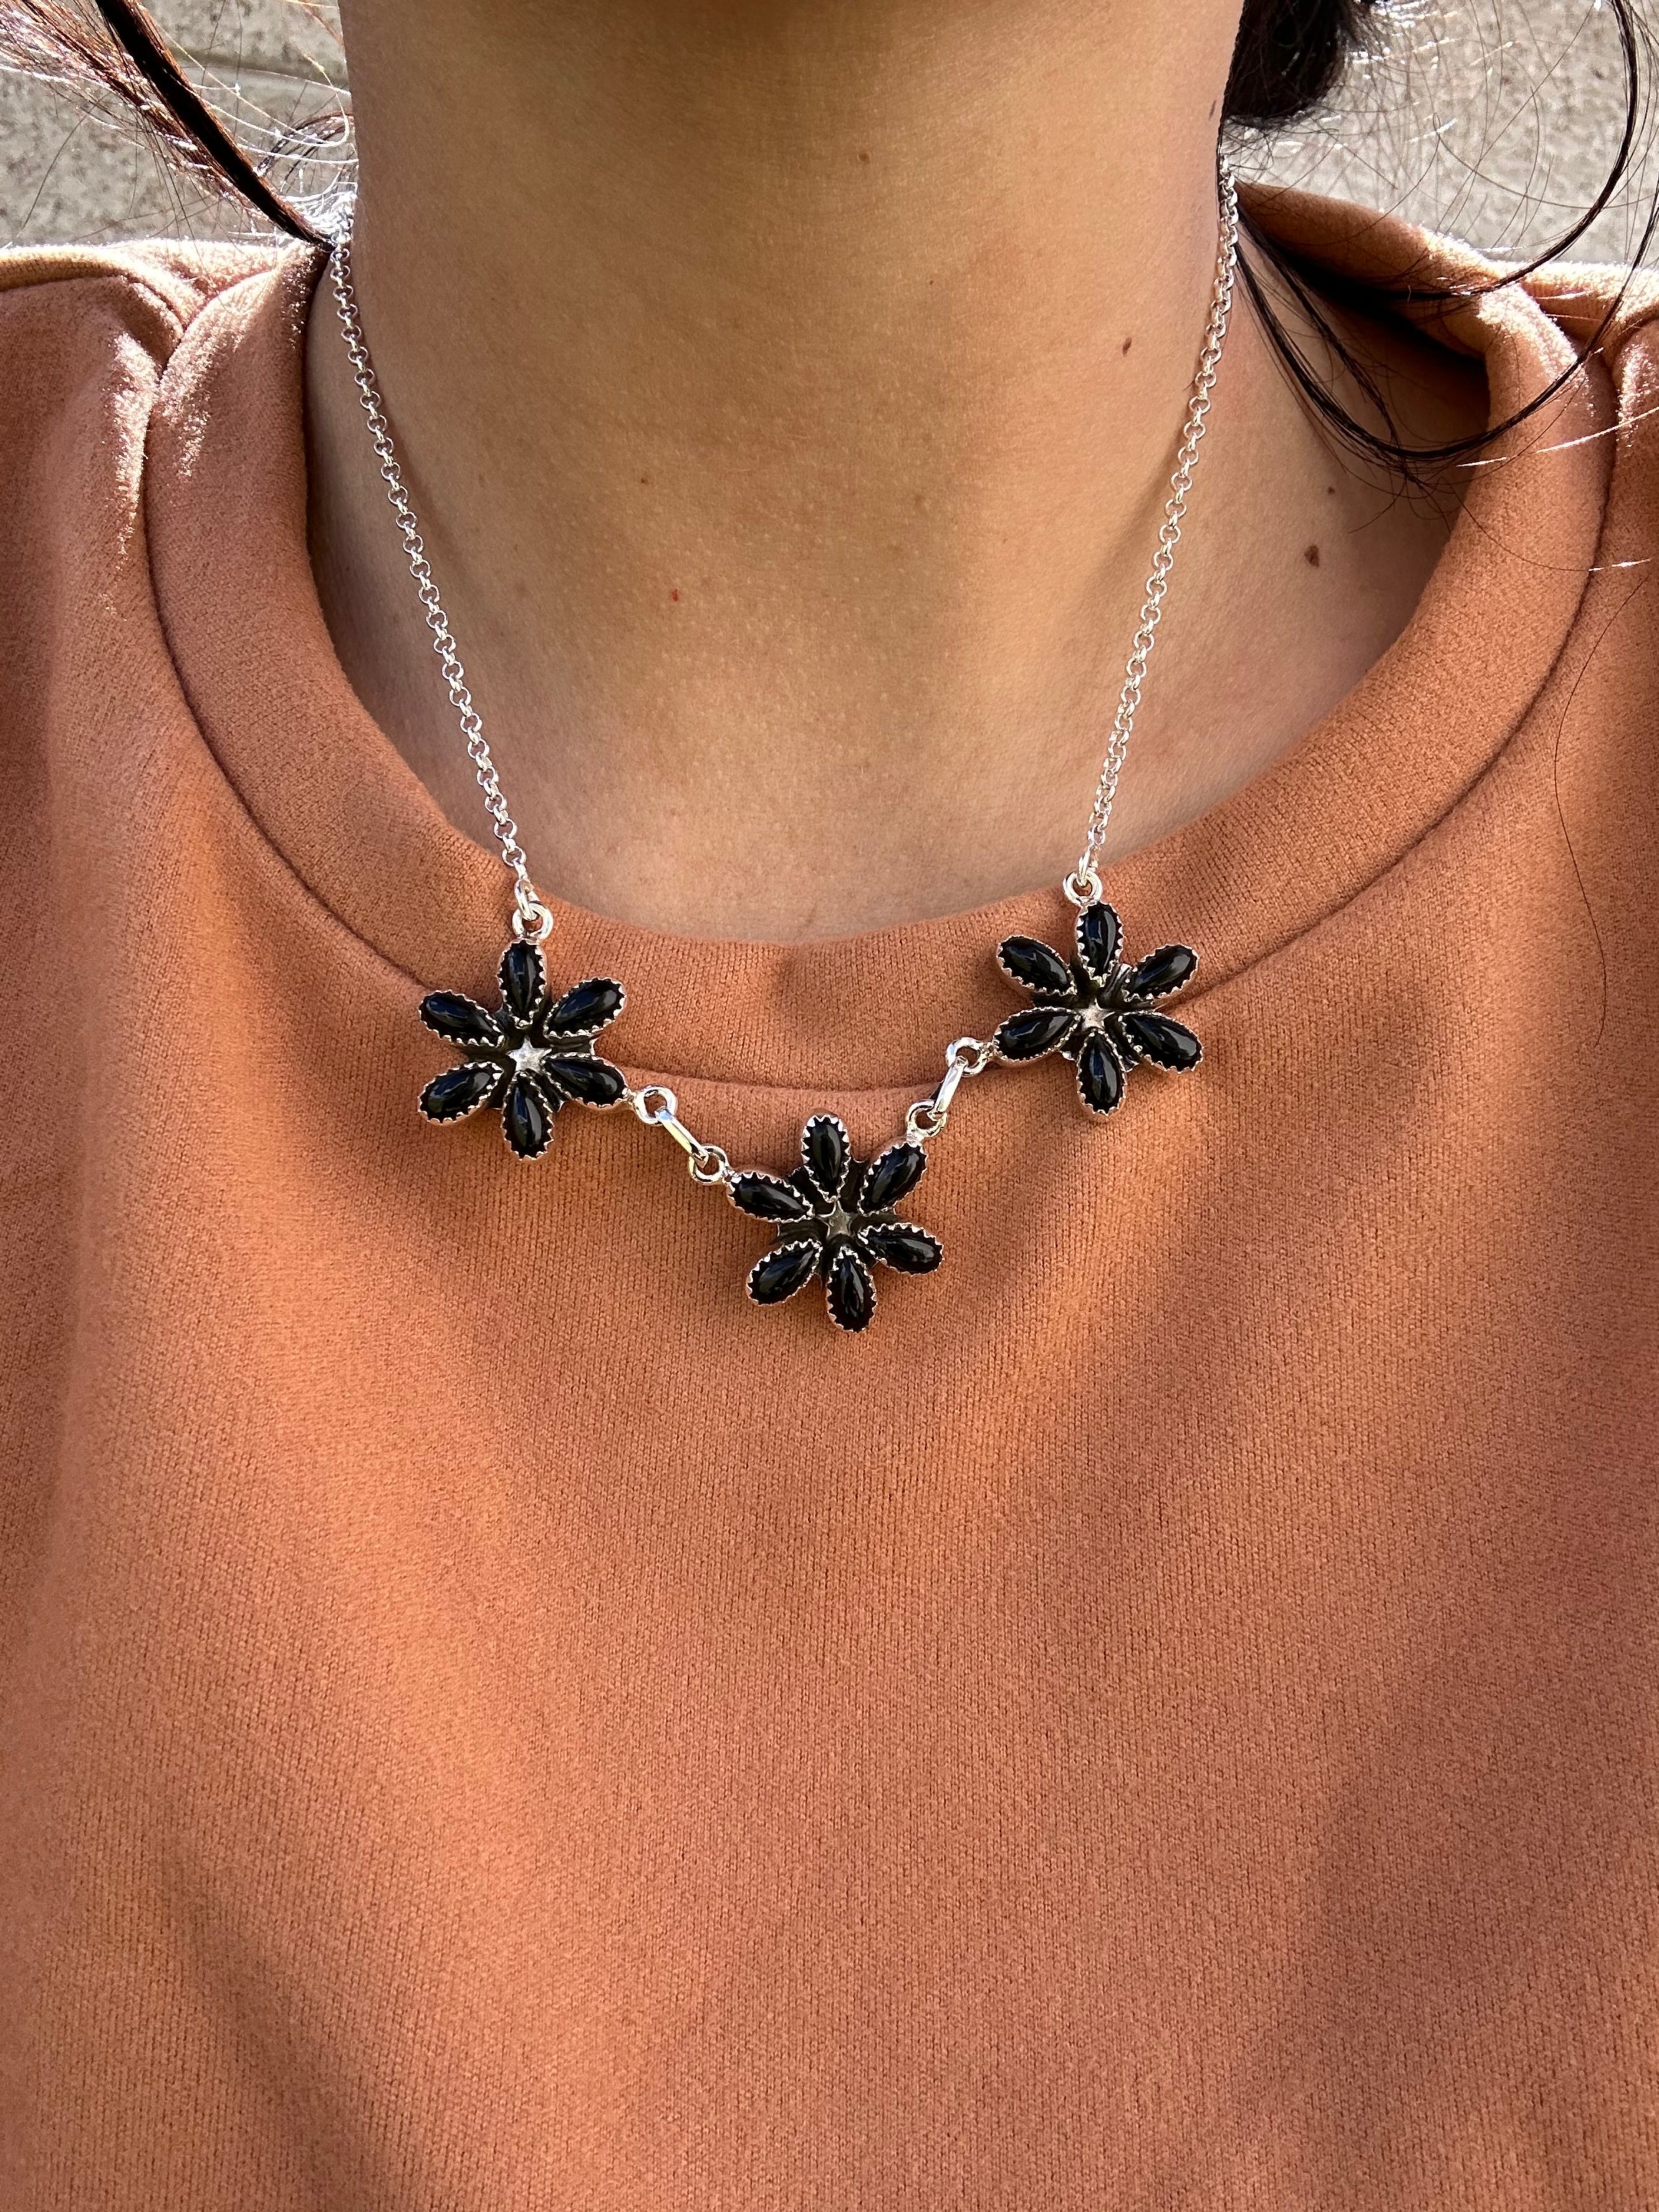 Southwest Handmade Onyx & Sterling Silver Cluster Necklace